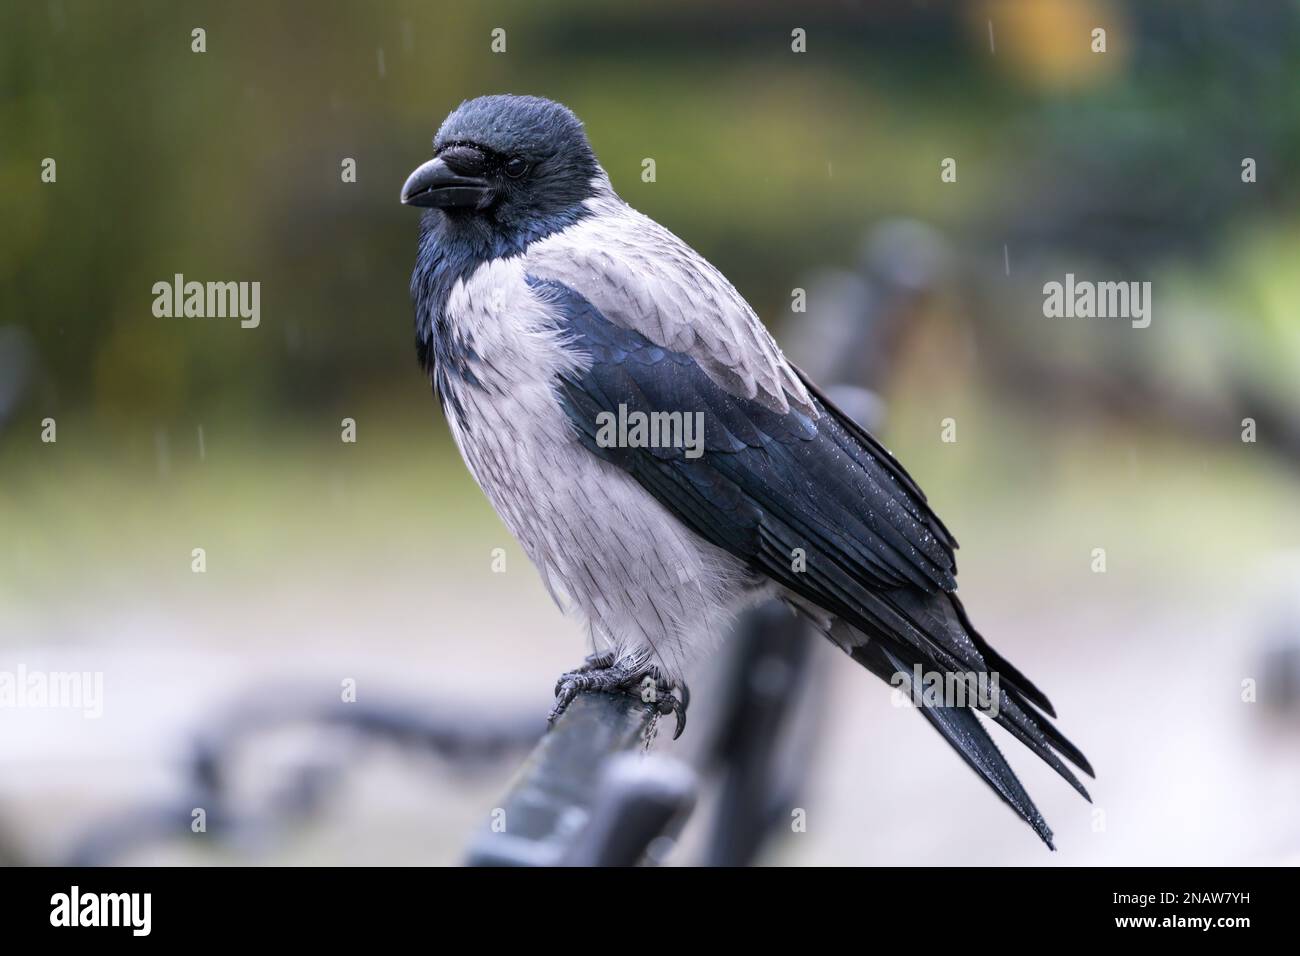 Hooded crow (Corvus cornix), also called hoodie, perched on a birch branch as it rains. Bokeh backround. Stock Photo